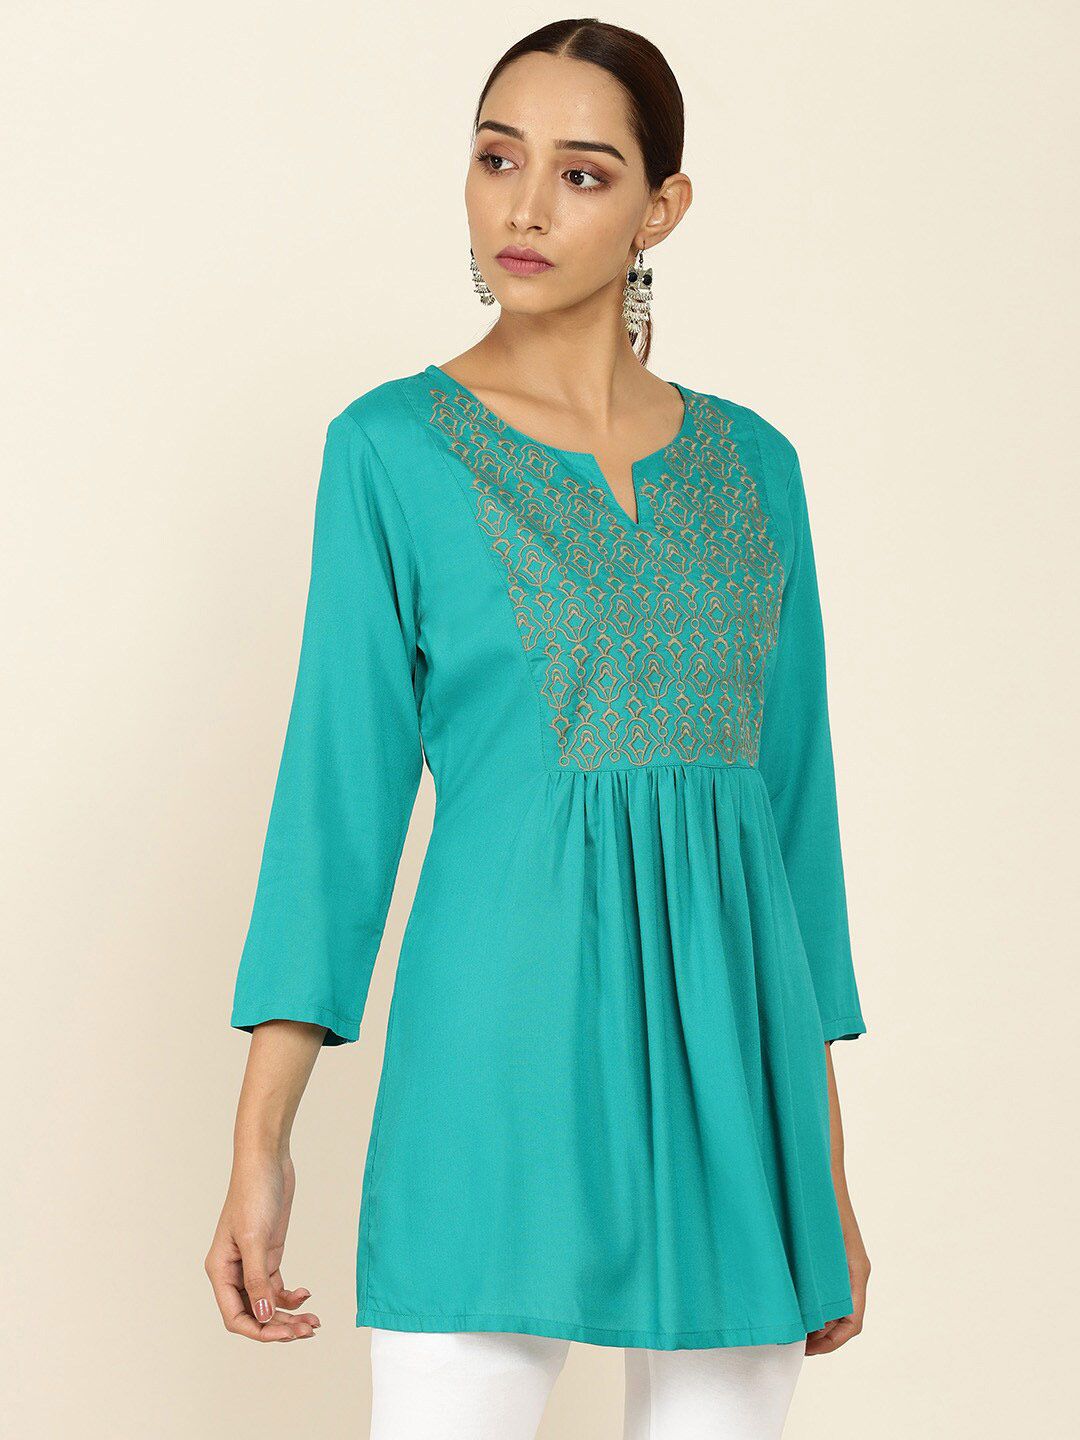 Soch Teal Blue & Tan Viscose Rayon Embroidered Tunic Price in India